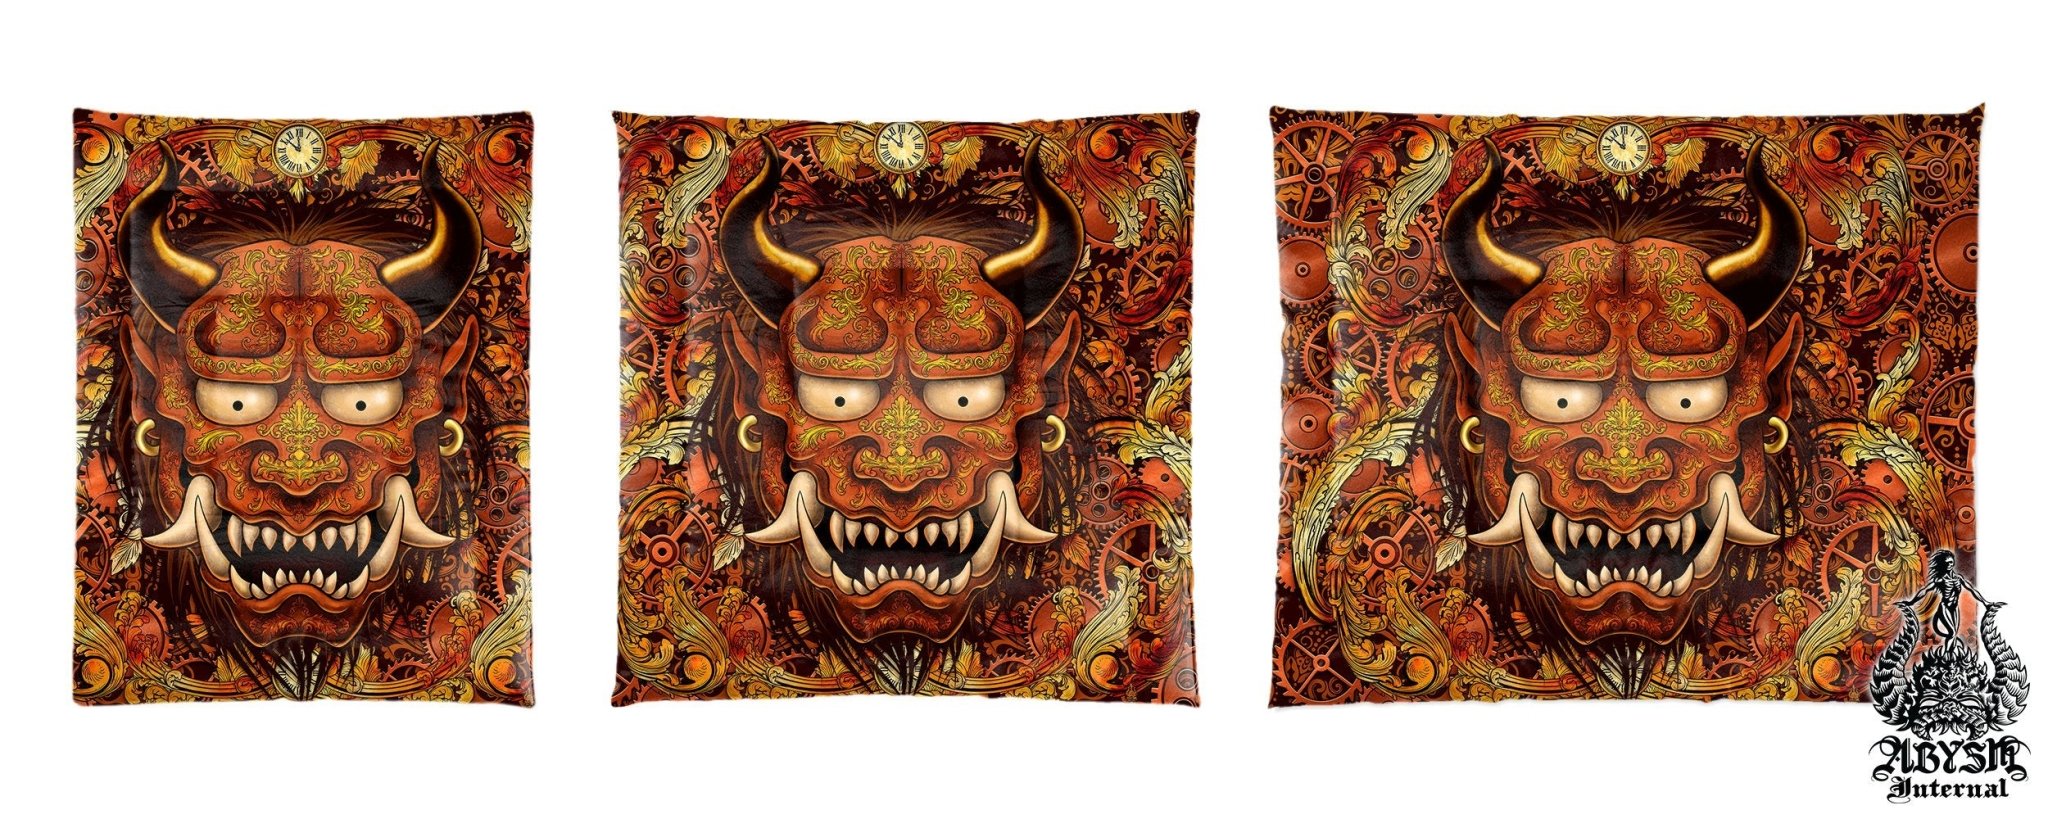 Oni Bedding Set, Comforter and Duvet, Steampunk Bed Cover and Bedroom Decor, King, Queen and Twin Size - Japanese Demon - Abysm Internal